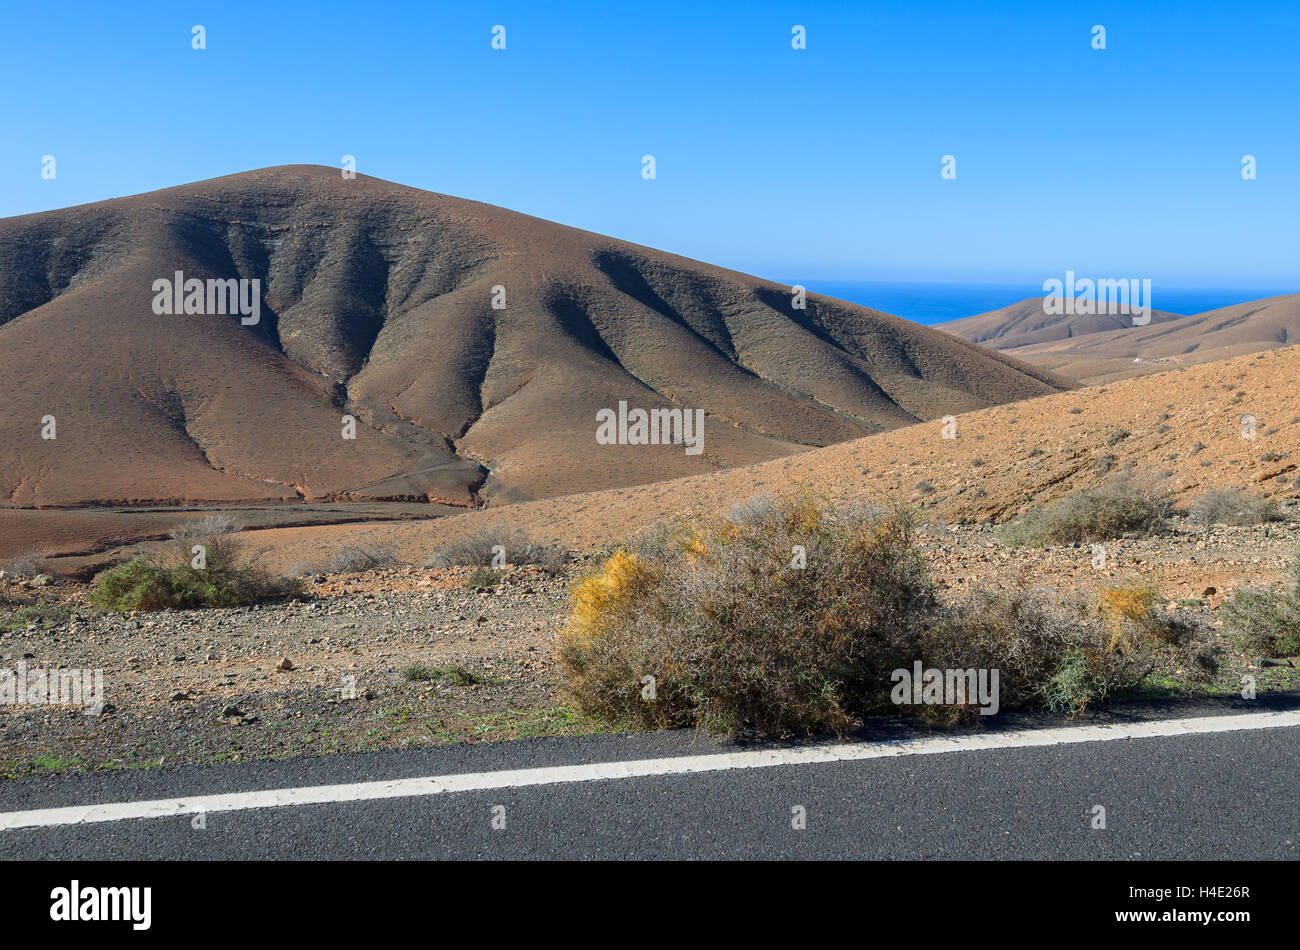 Scenic mountain road with volcano view near Tuineje village, Fuerteventura, Canary Islands, Spain Stock Photo